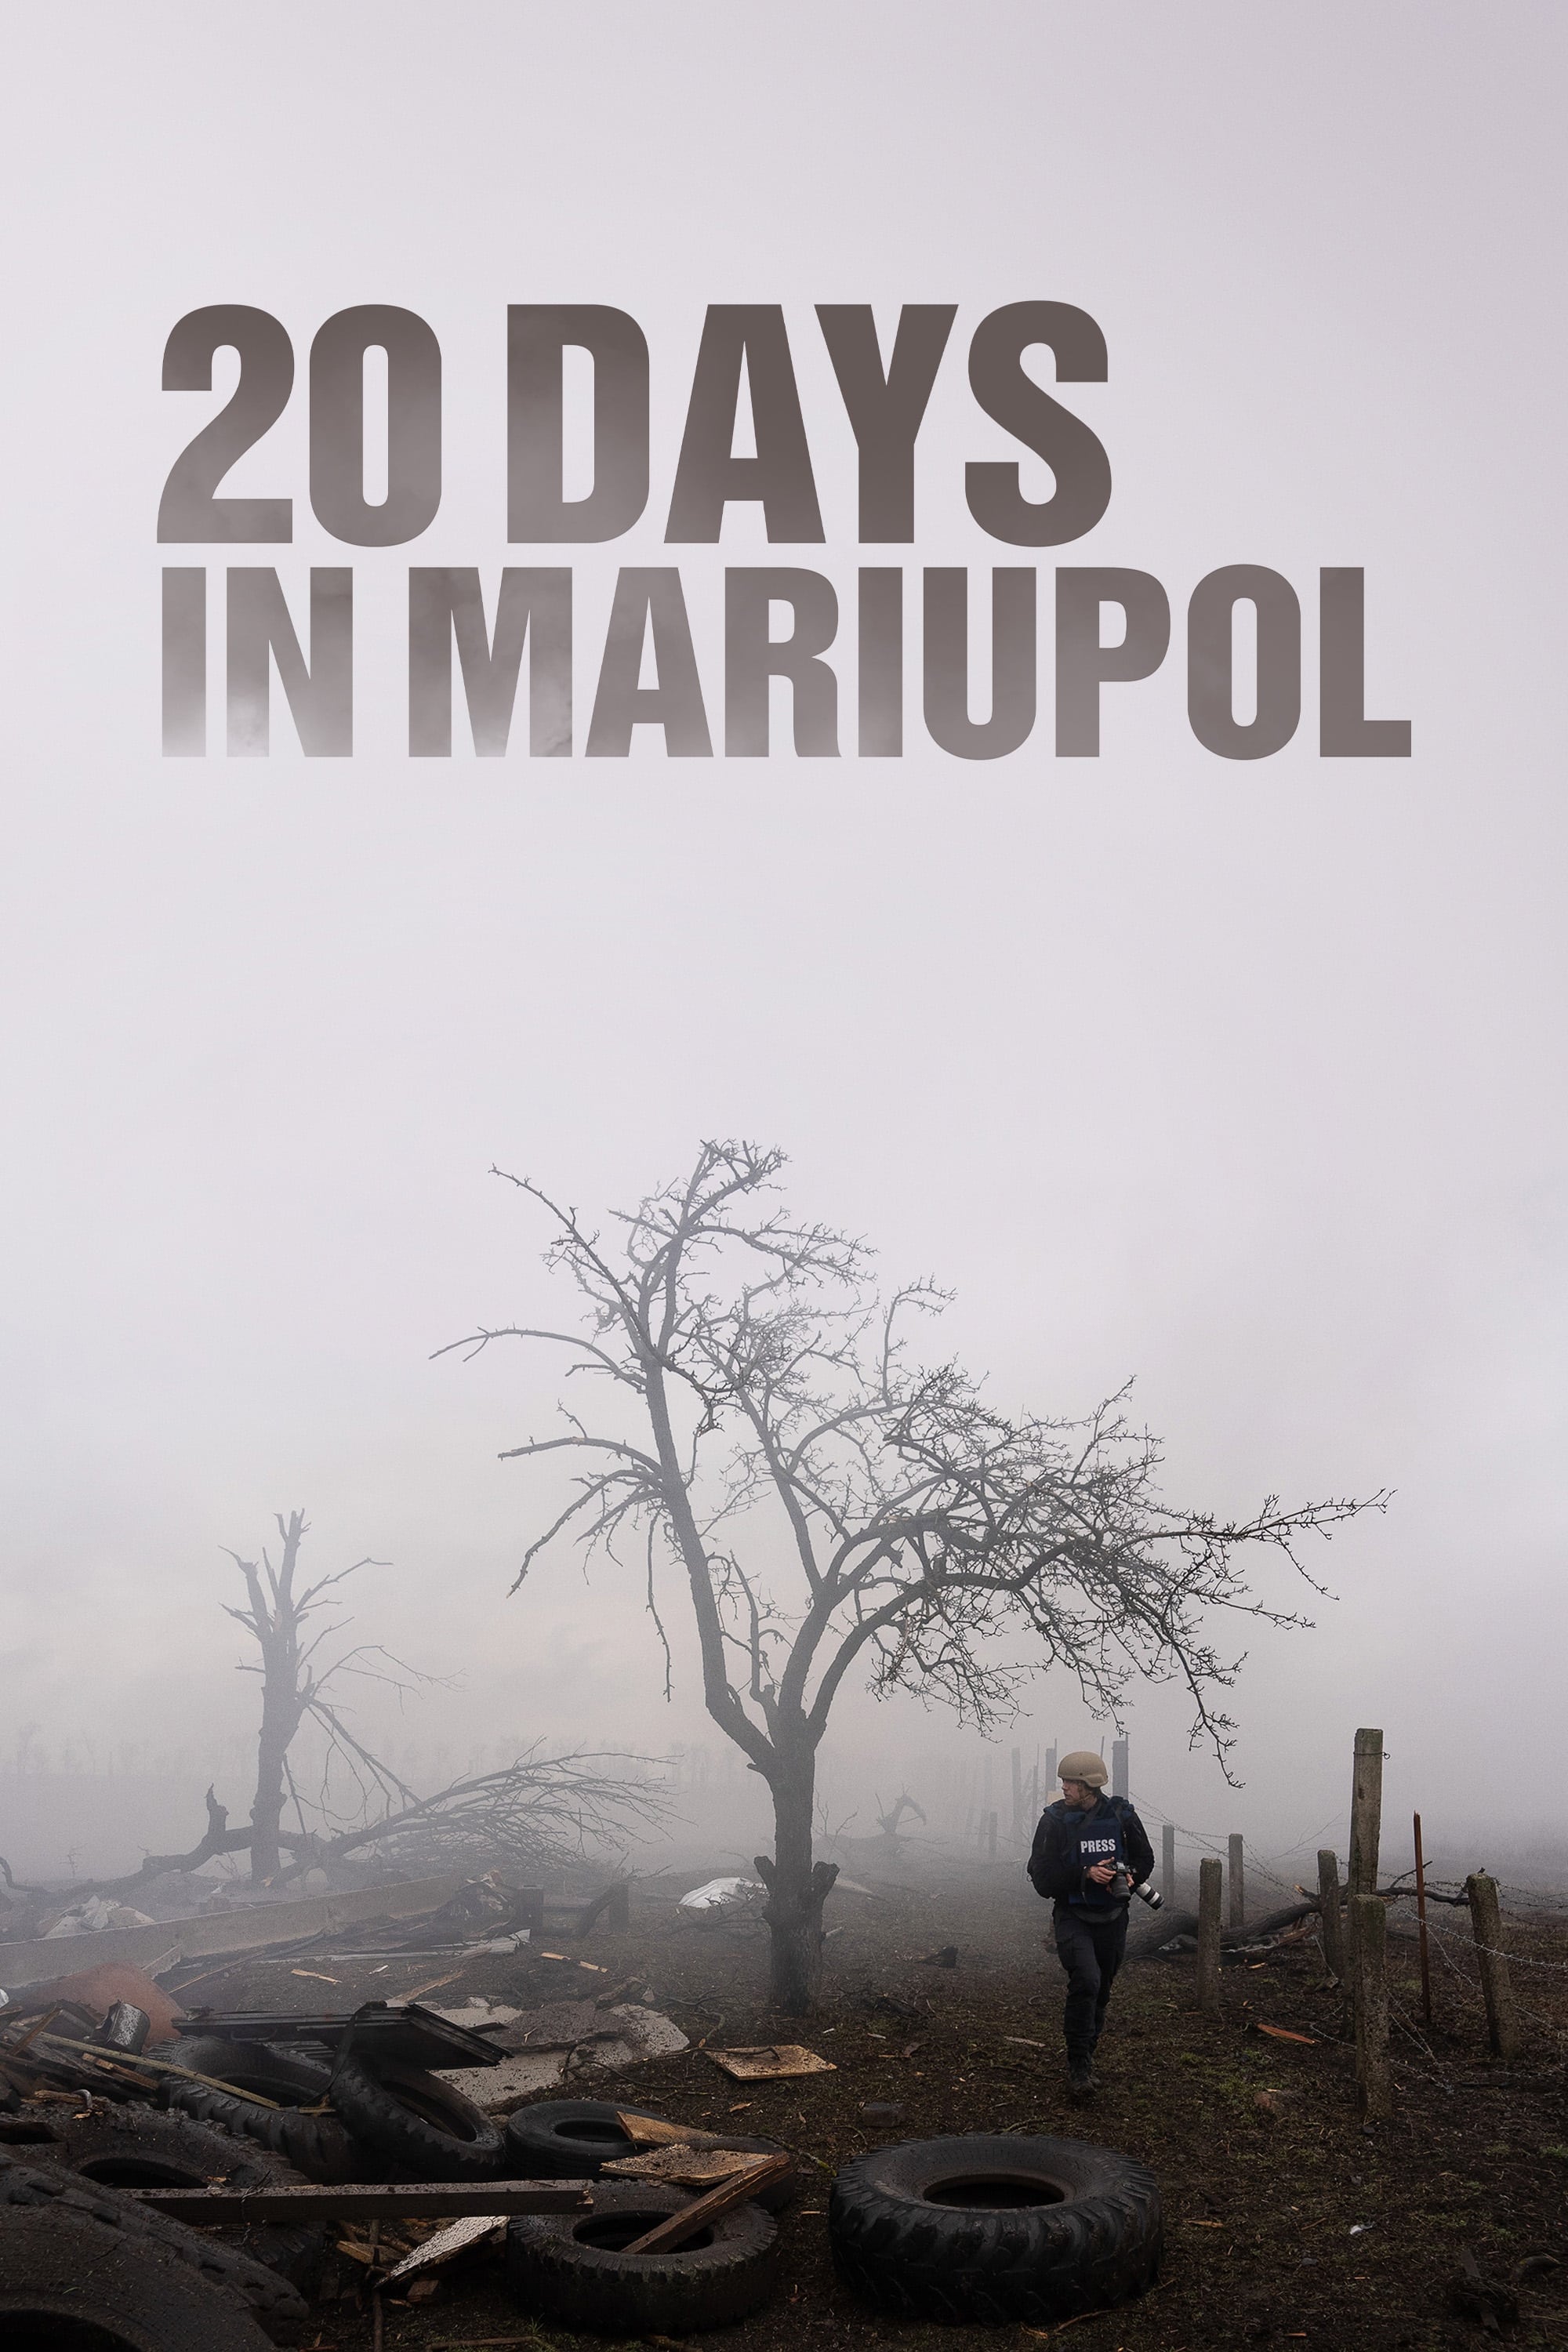 20 Days in Mariupol Poster